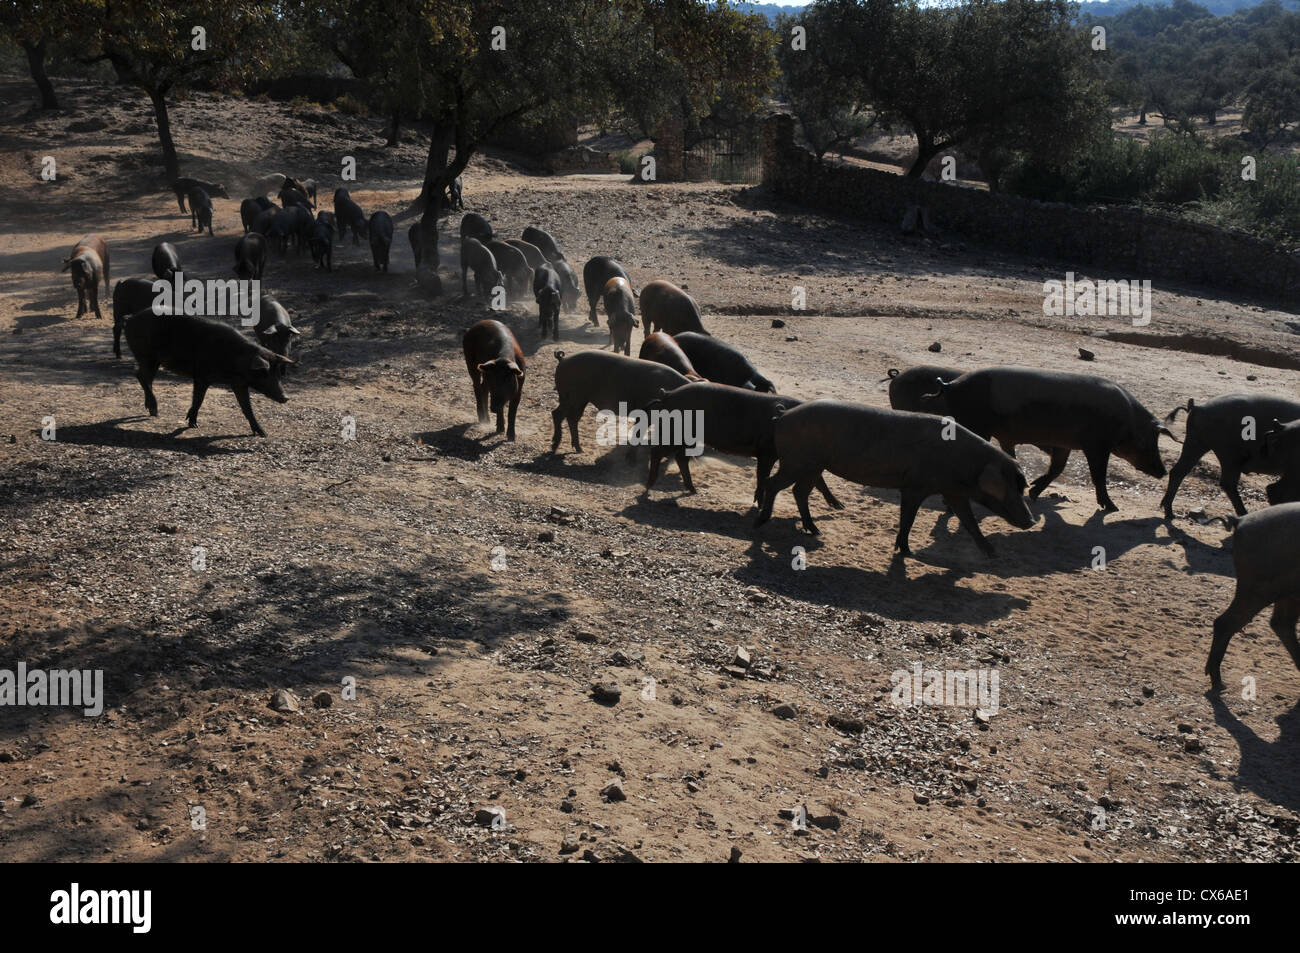 Pata negra, Iberian pigs trotting in dust on parched dry land, hot summer day, Encina oak trees, Sierra. Stock Photo